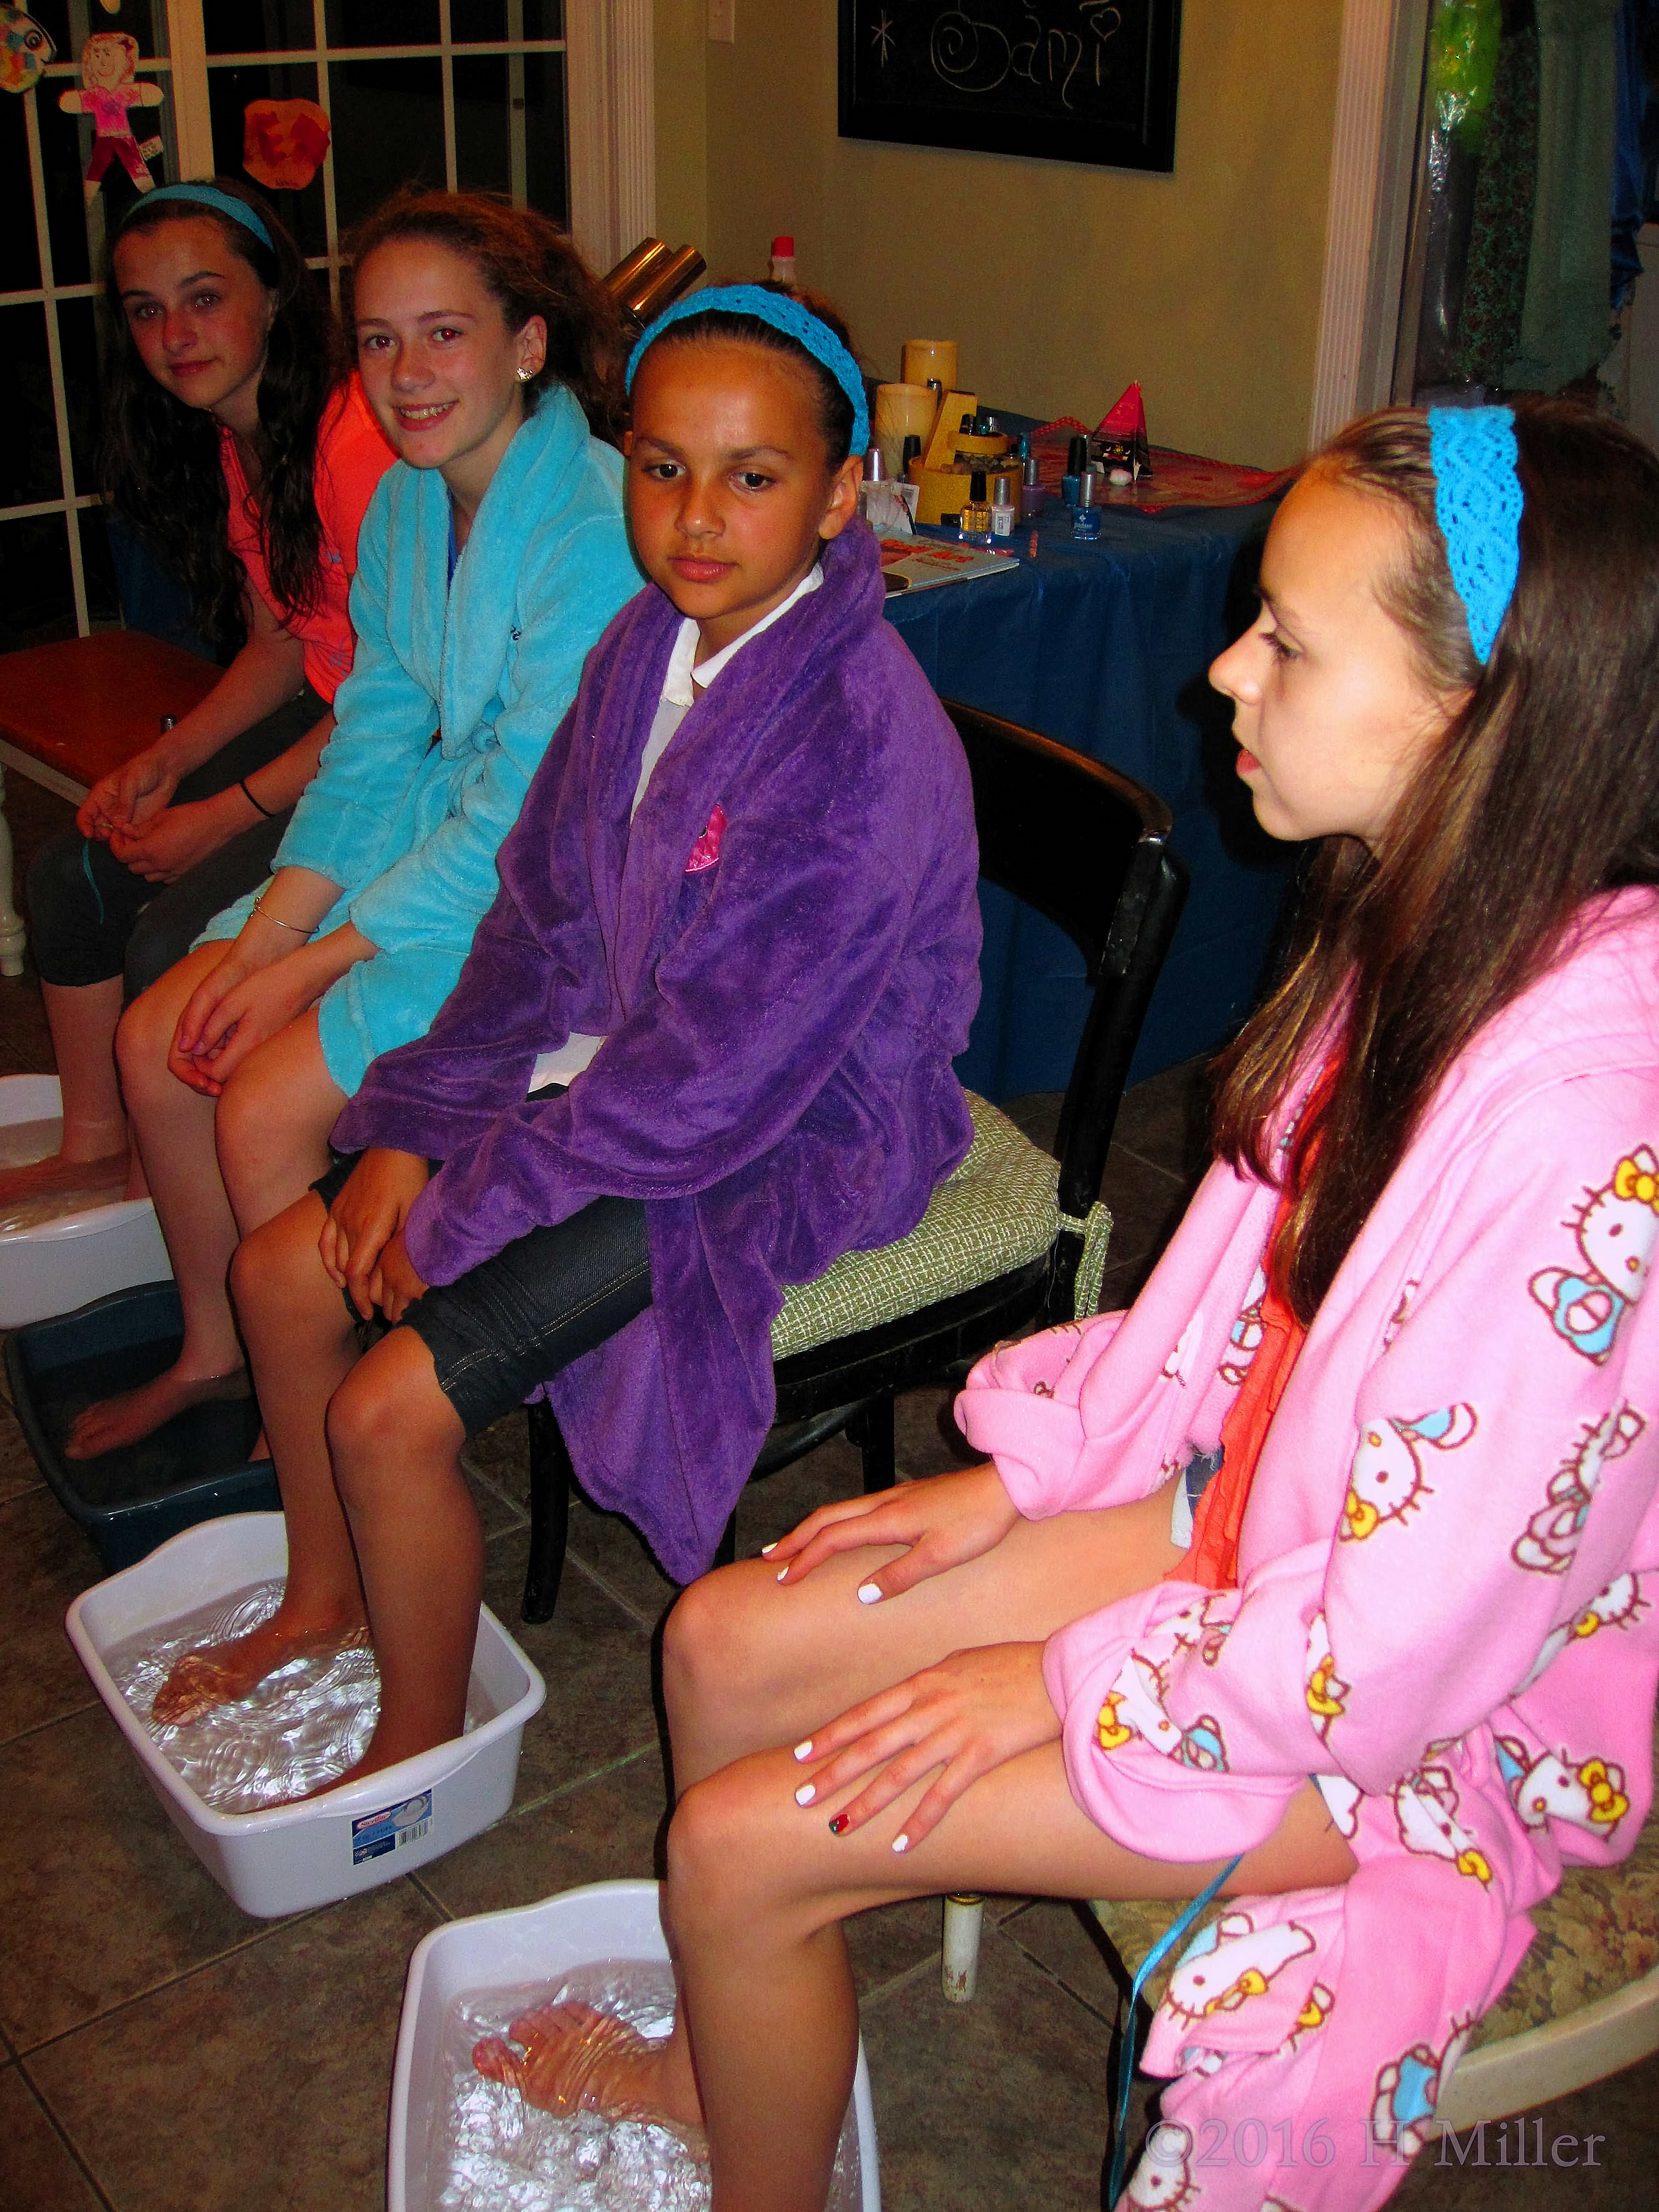 Enjoying Girls Pedicures Together At Sami's Spa Party For Girls. 